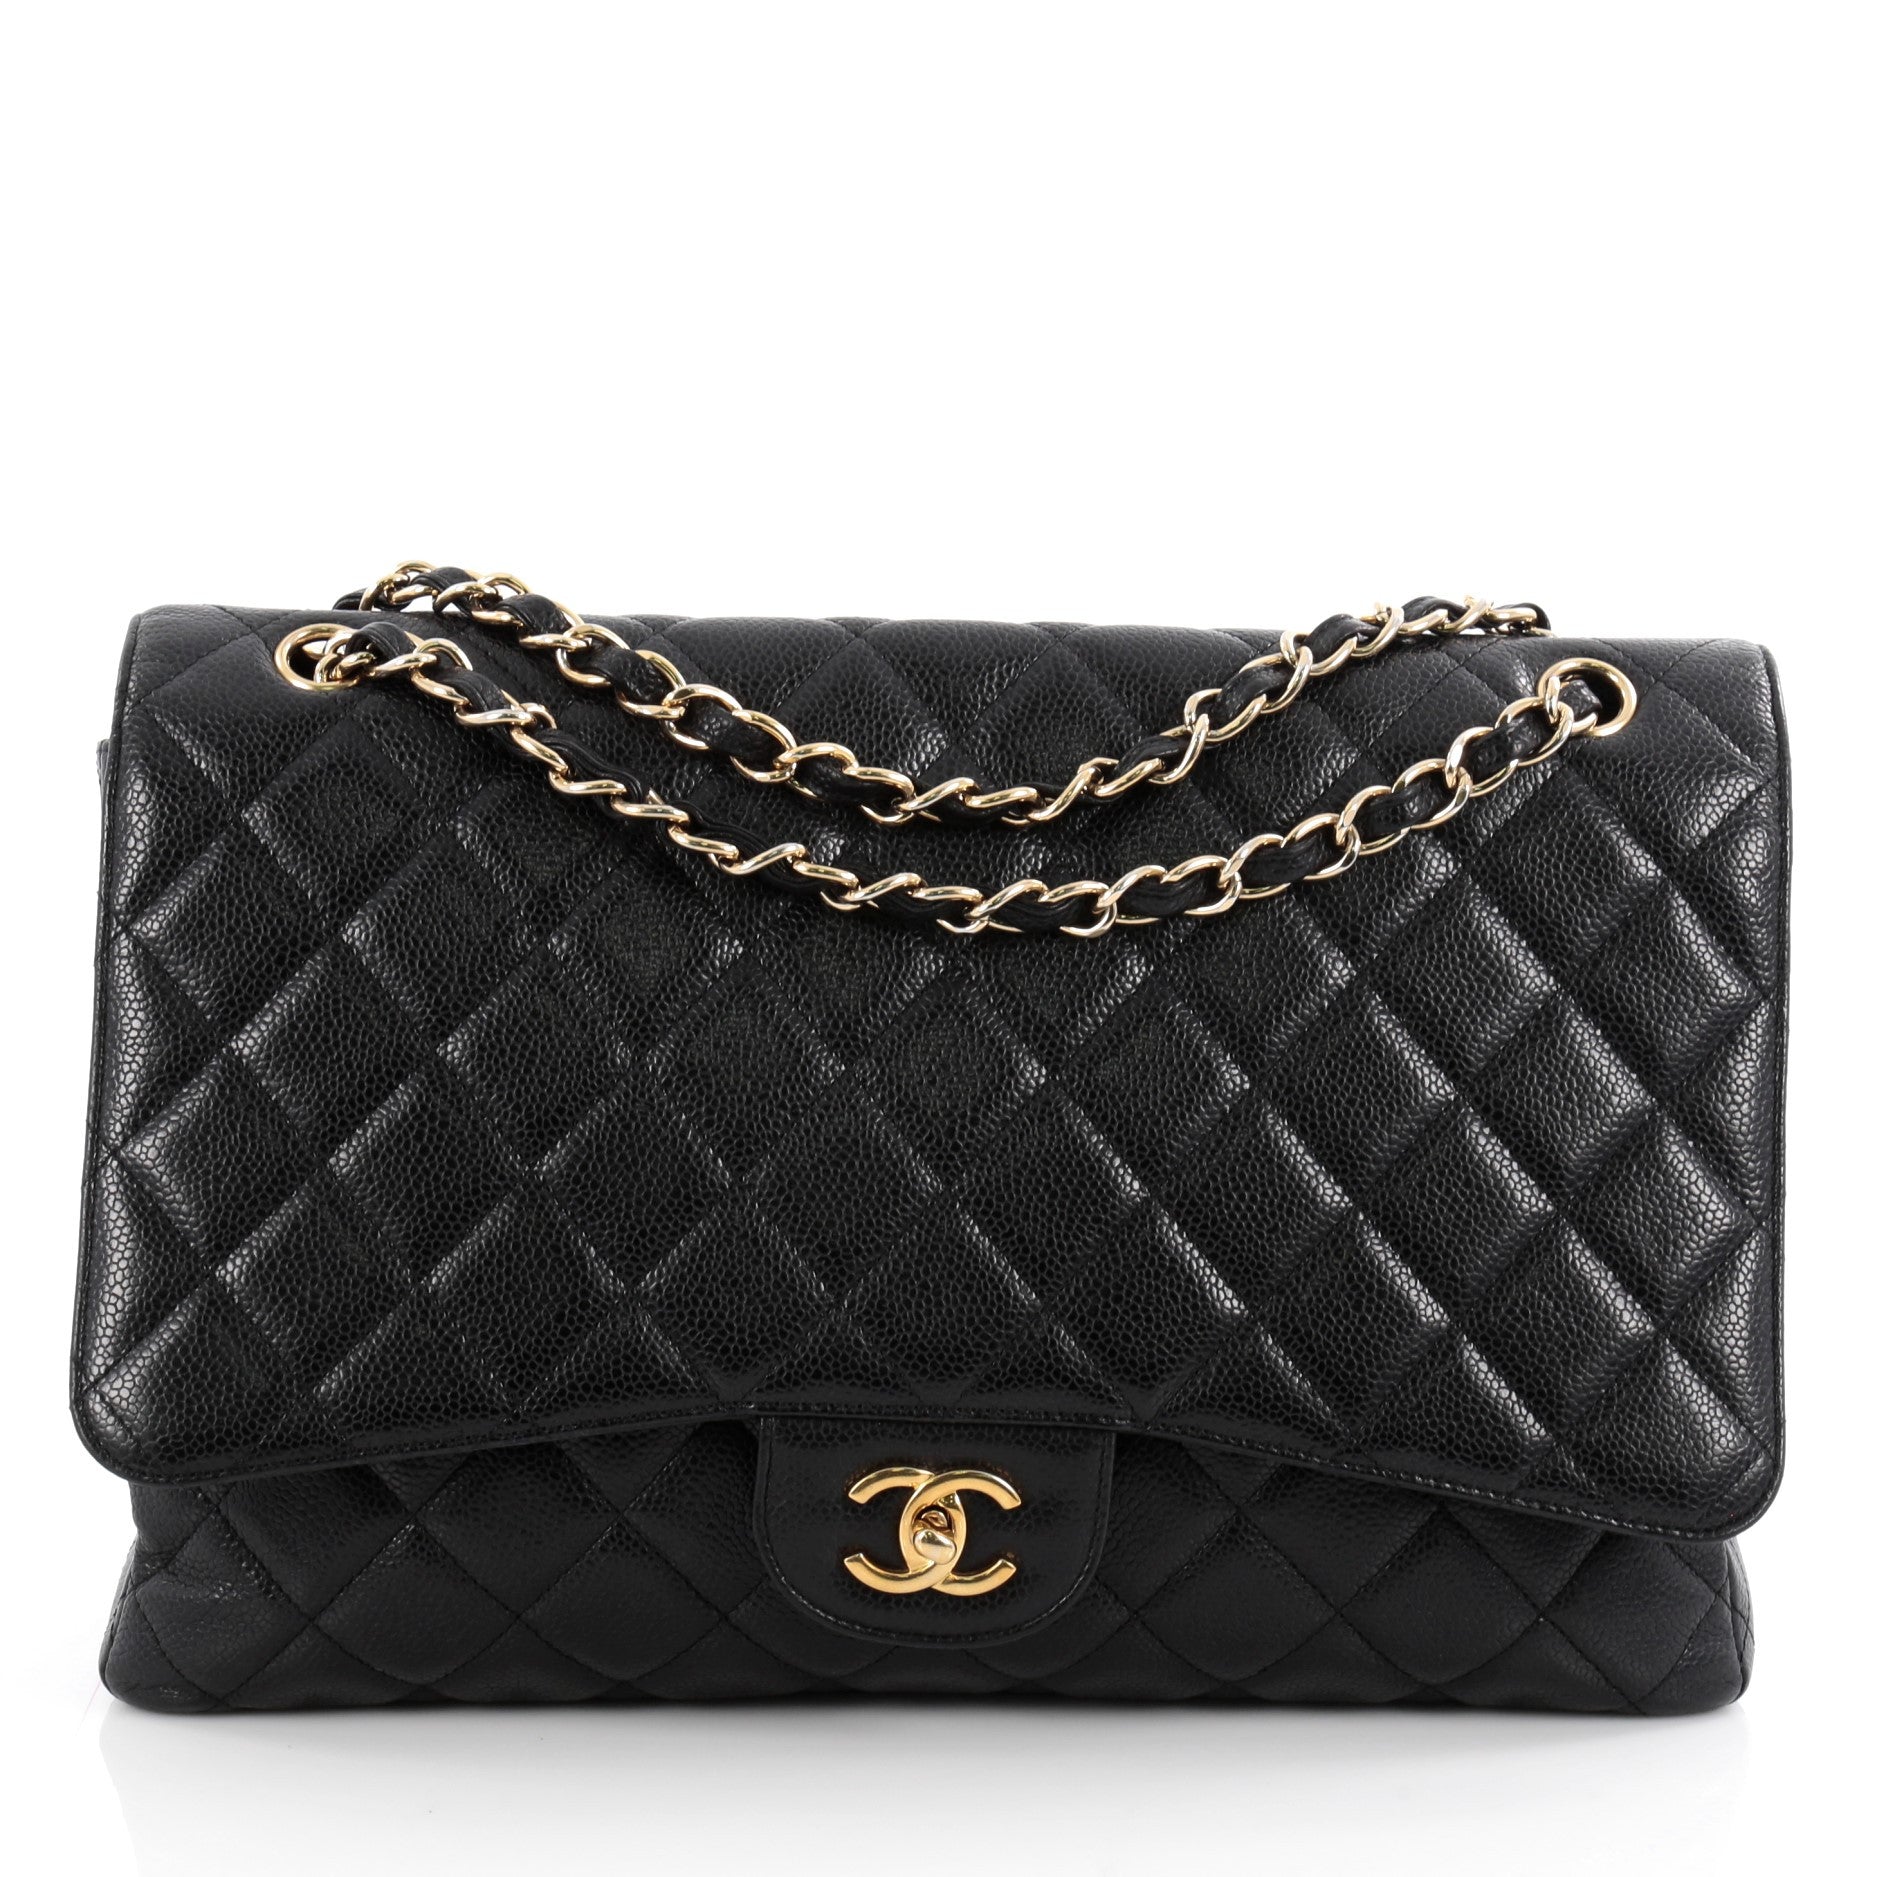 20865-01_Chanel_Classic_Single_Flap_Bag_Quilted_Ca_2D_0003.jpg?v=1575947390